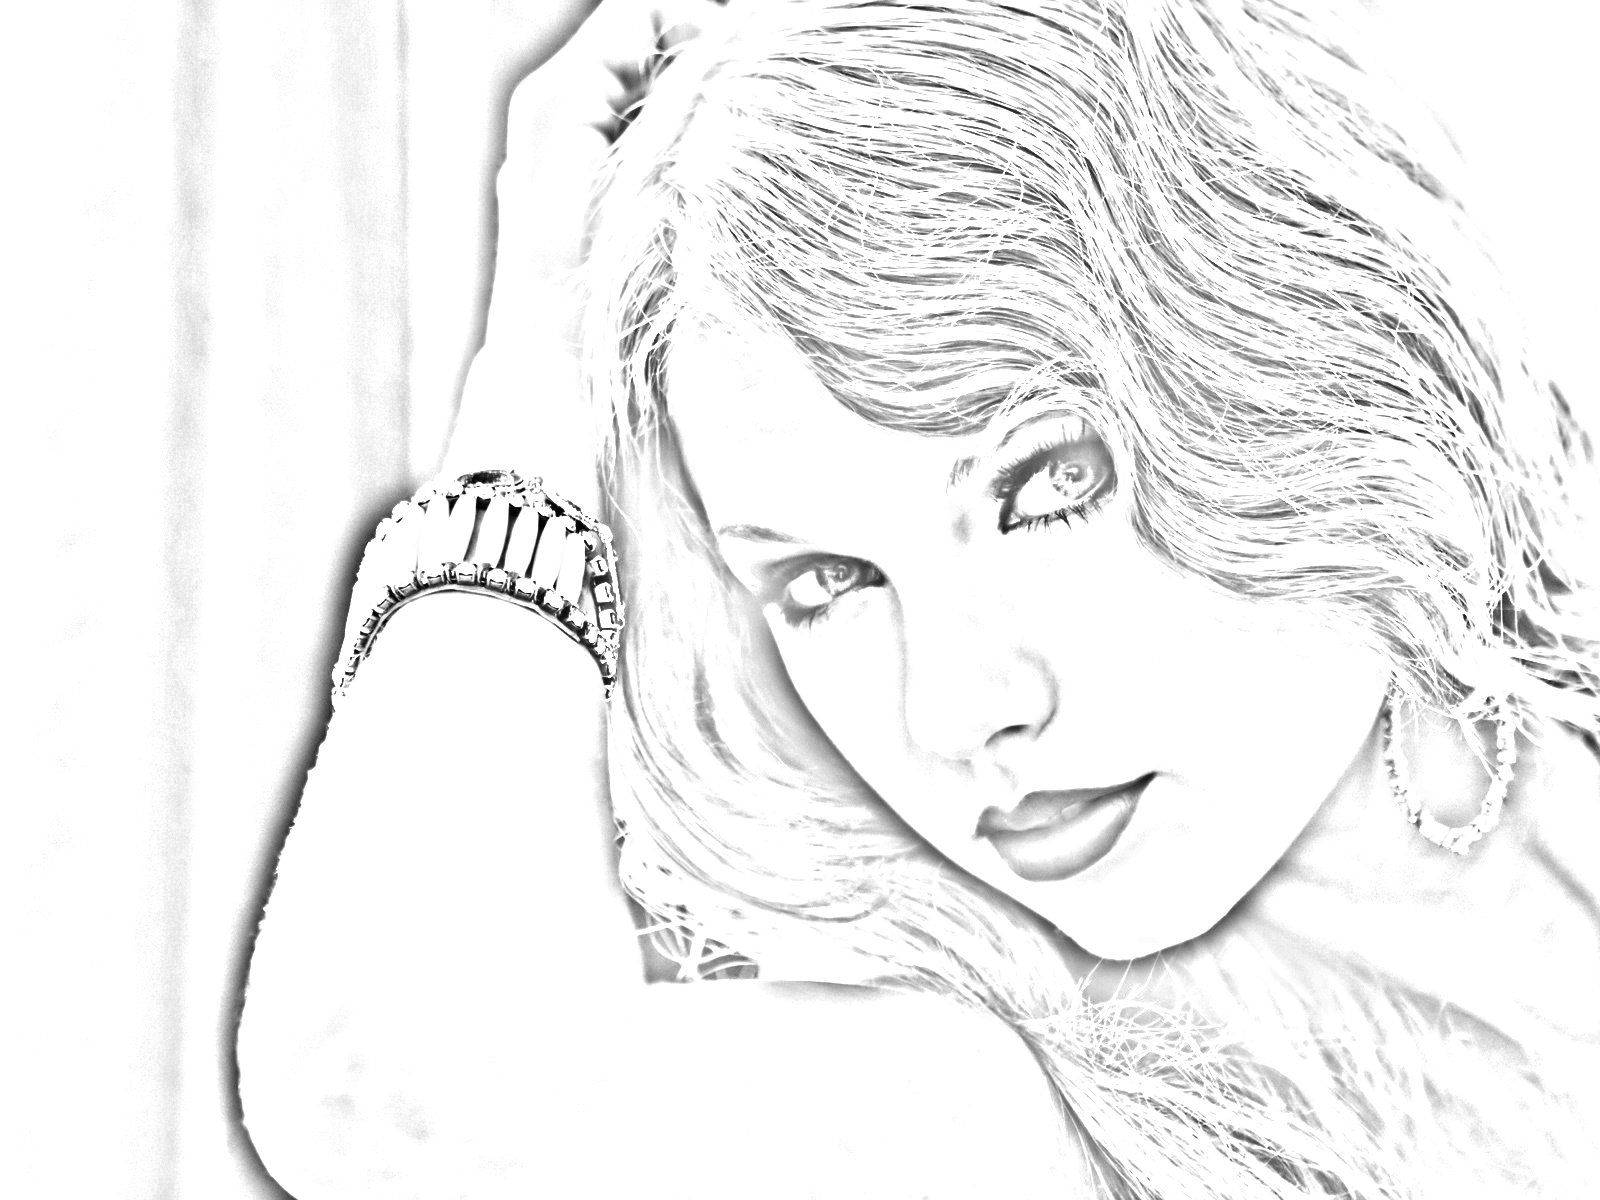 Taylor Swift Free Printable Coloring Pages - Coloring Home